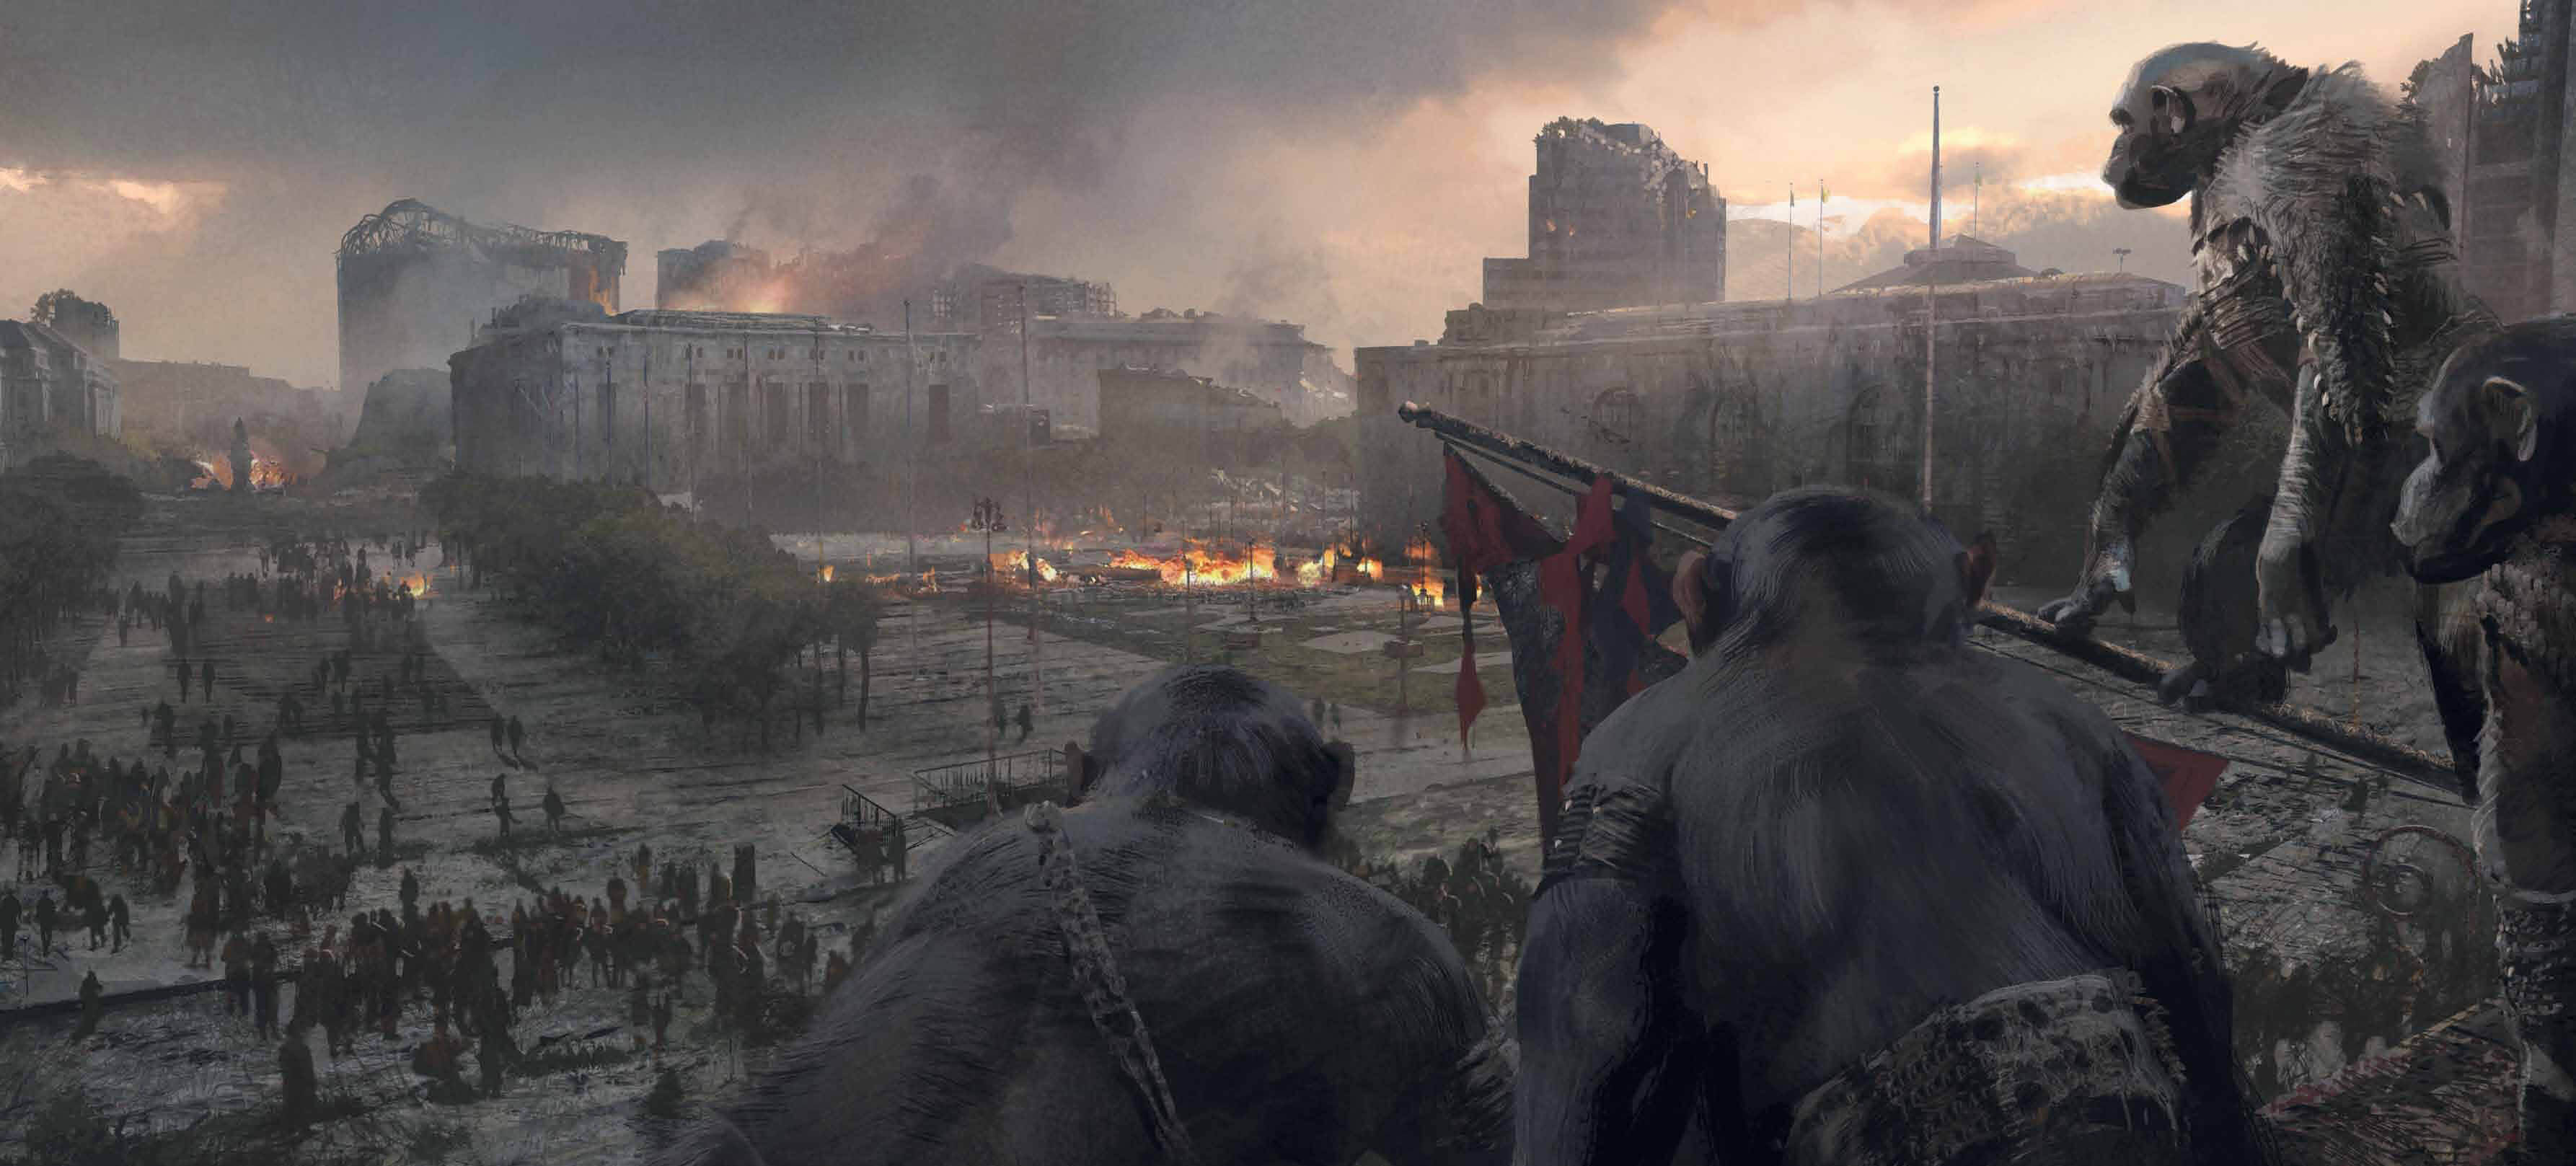 Apes Dawn Of The Planet Of The Apes - HD Wallpaper 